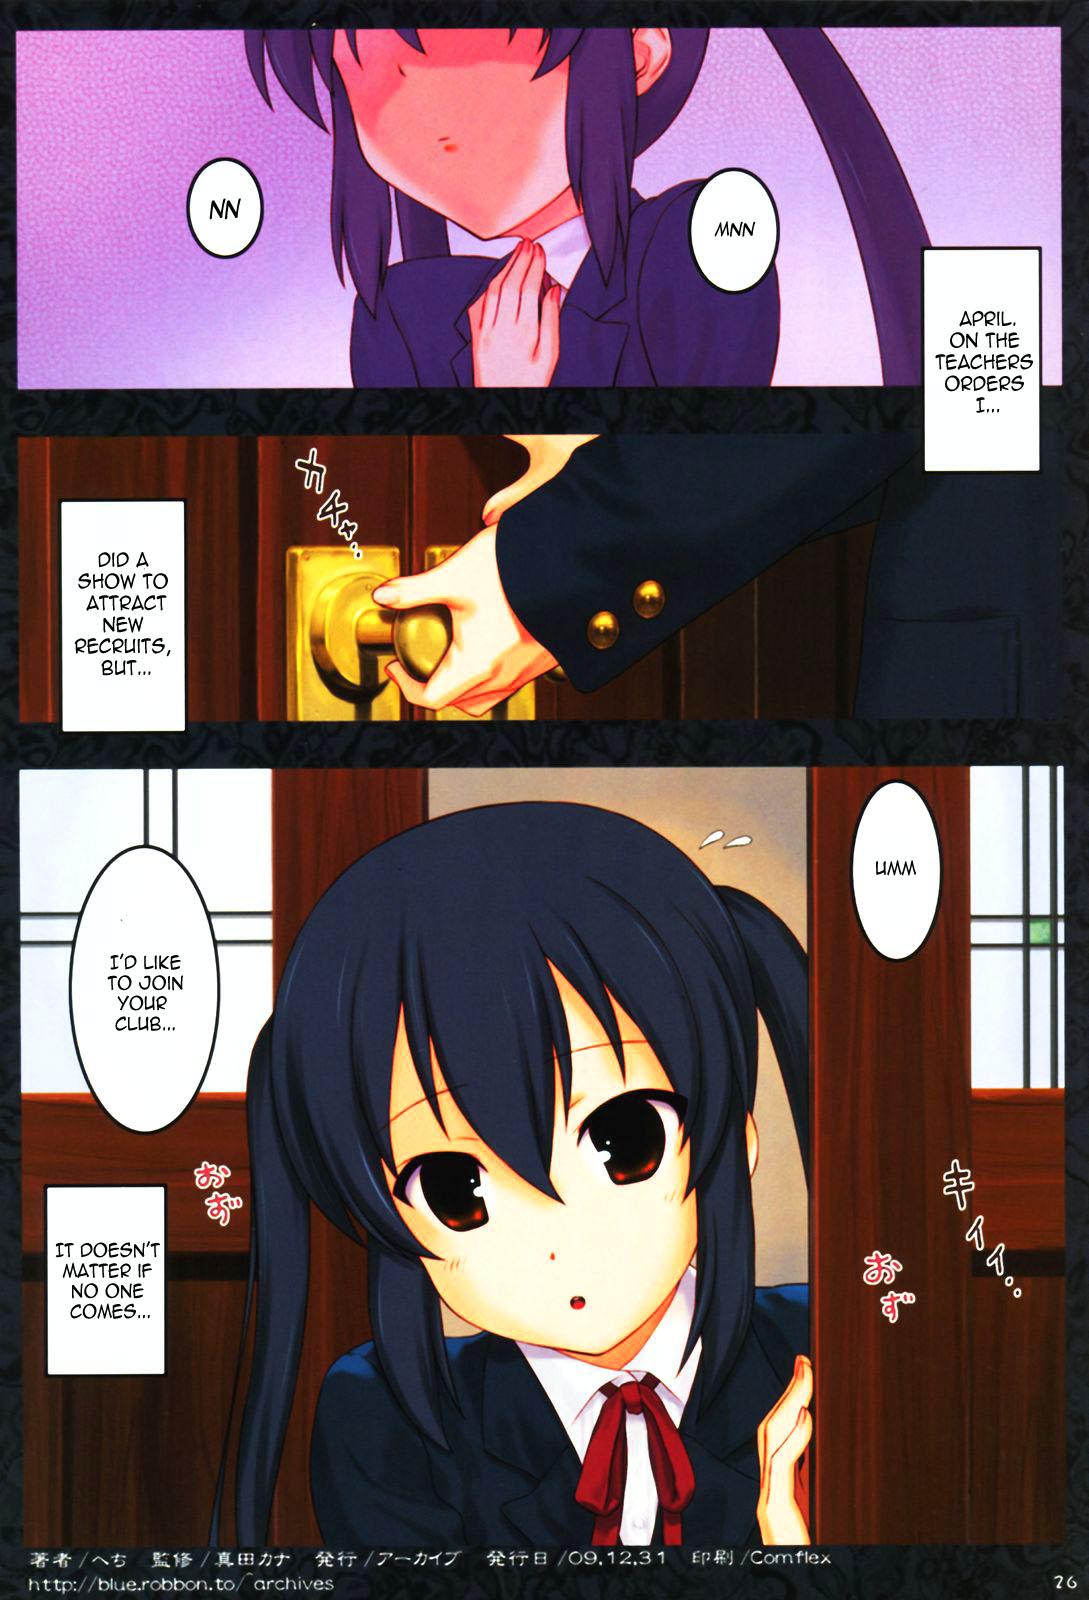 Bubble (C77) [Archives (Hechi)] Ura K-ON!! 2 | The Other K-ON!! 2 (K-ON!) [English] =LWB= - K-on Sola - Page 26